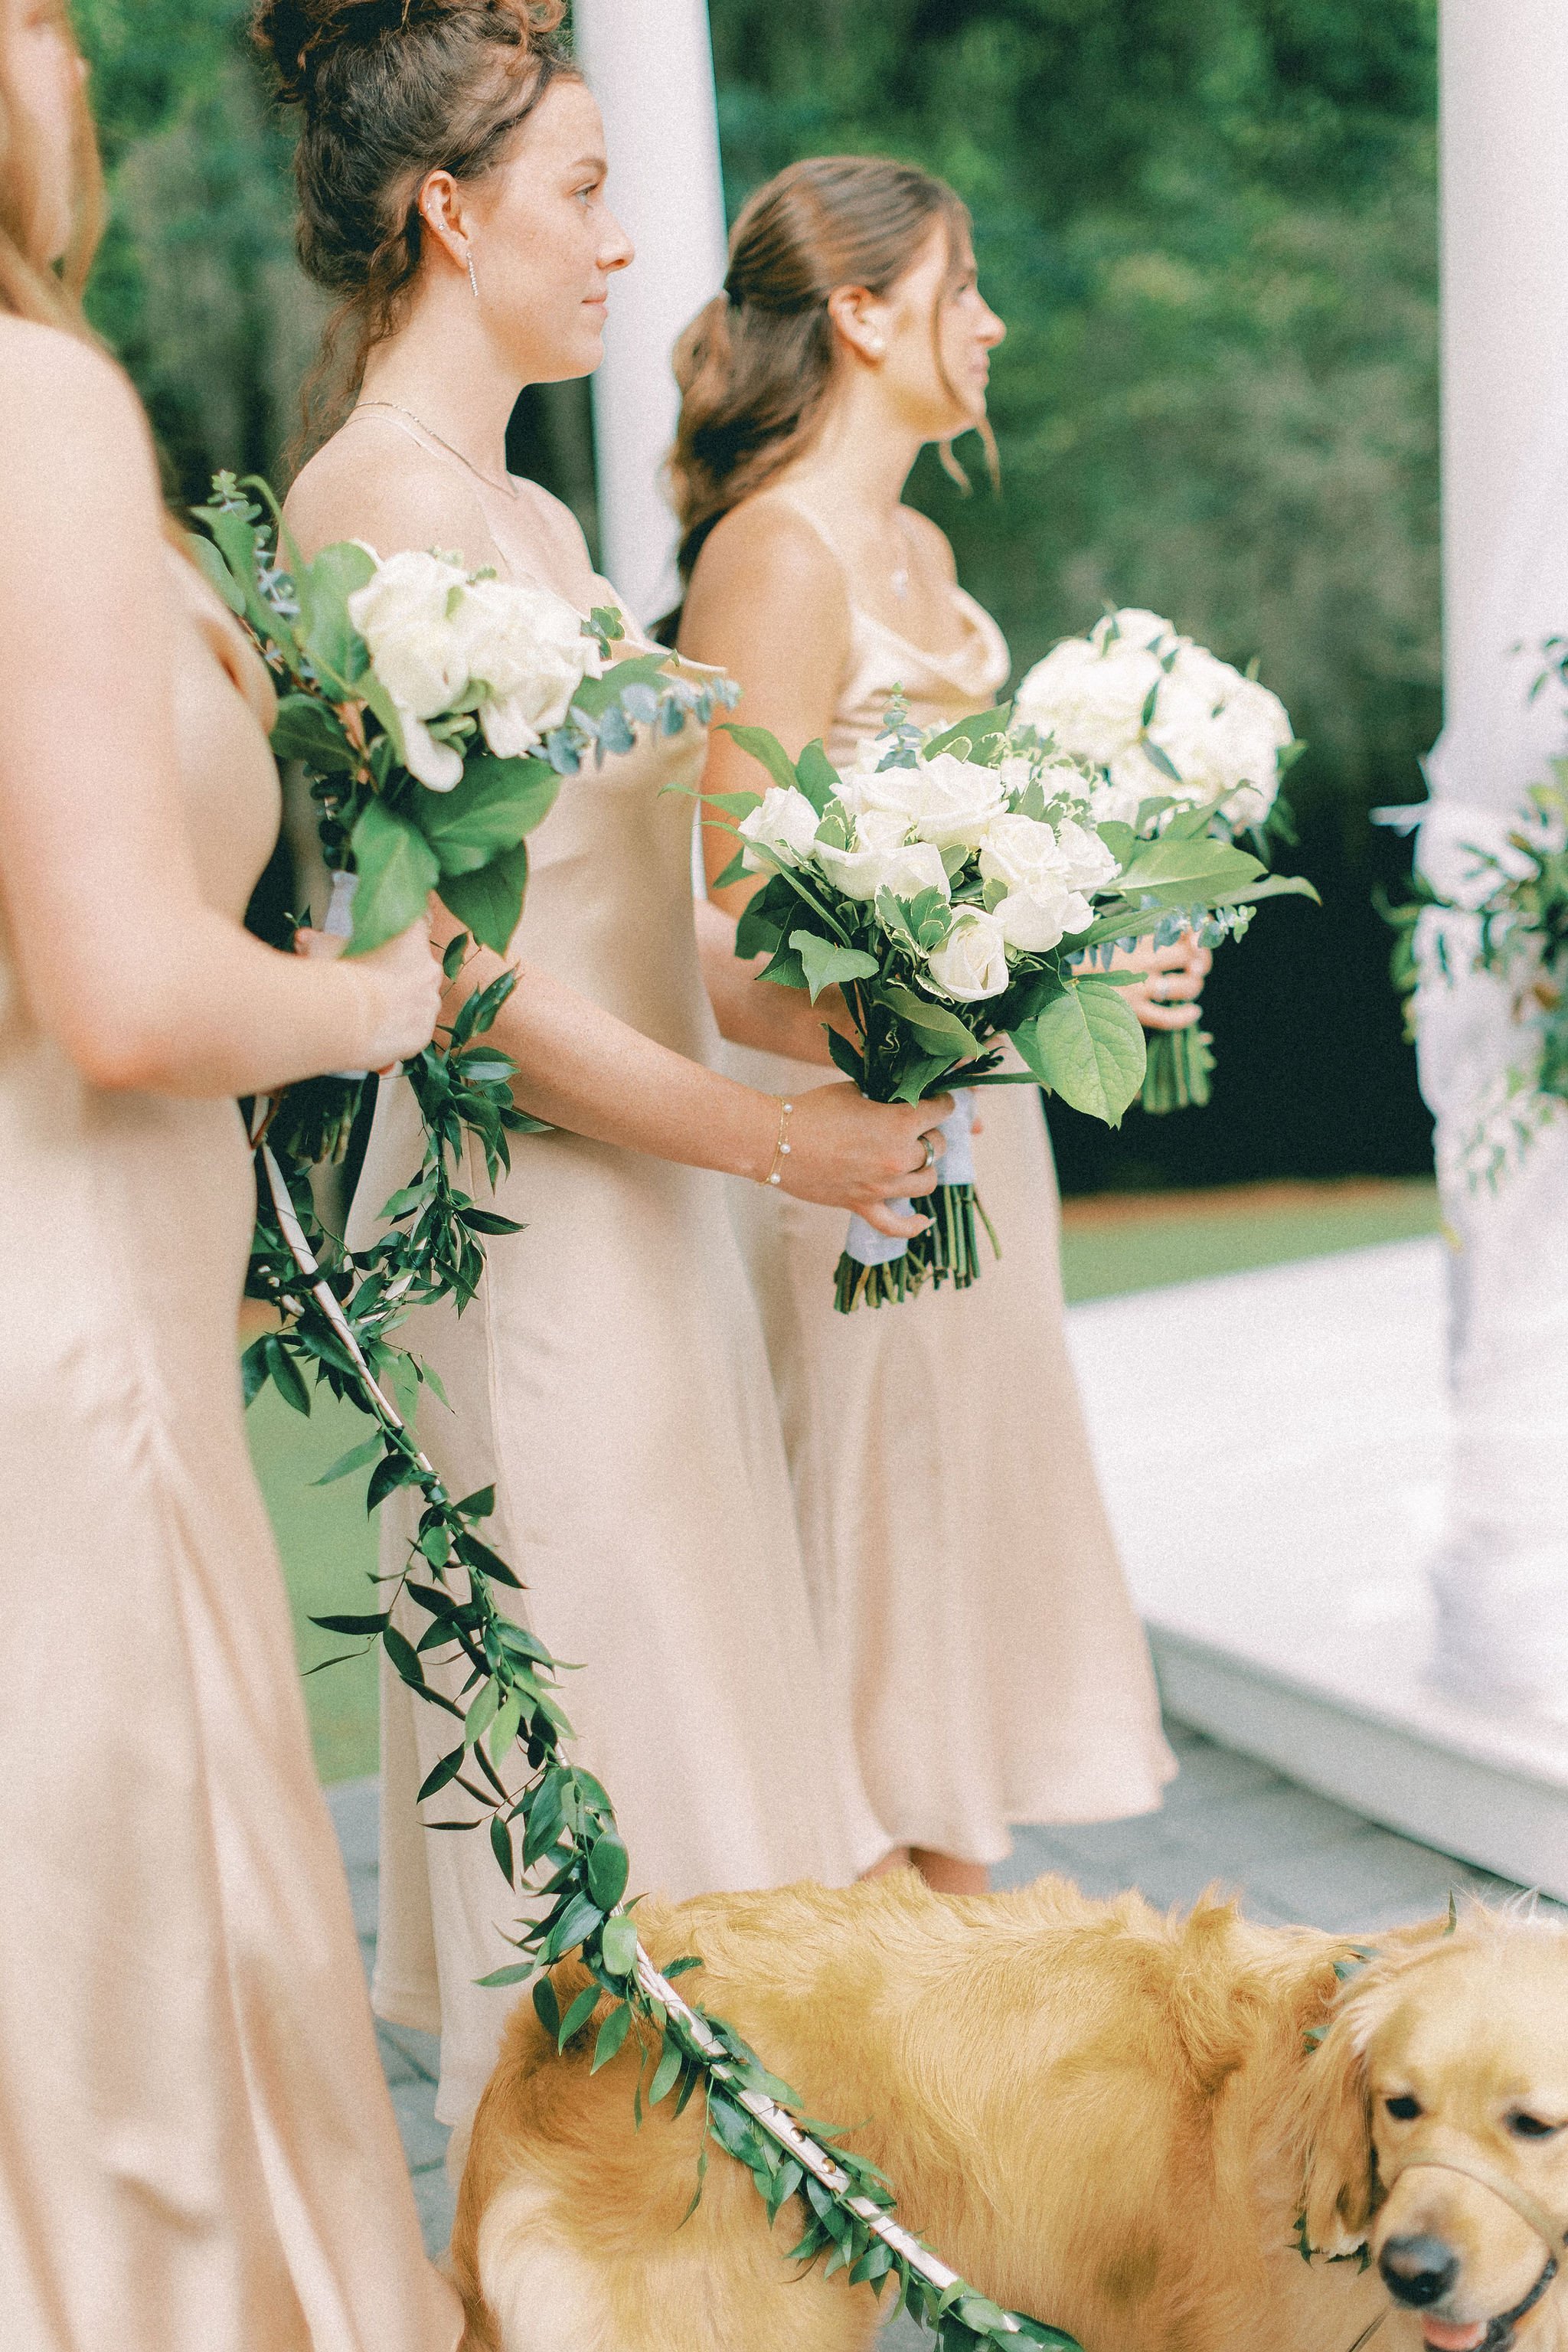 liz-and-evans-coastal-chic-sophisticated-southern-wedding-at-the-mackey-house-in-savannah-ga-with-modern-wedding-florals-designed-by-savannah-florist-ivory-and-beau-16.jpg